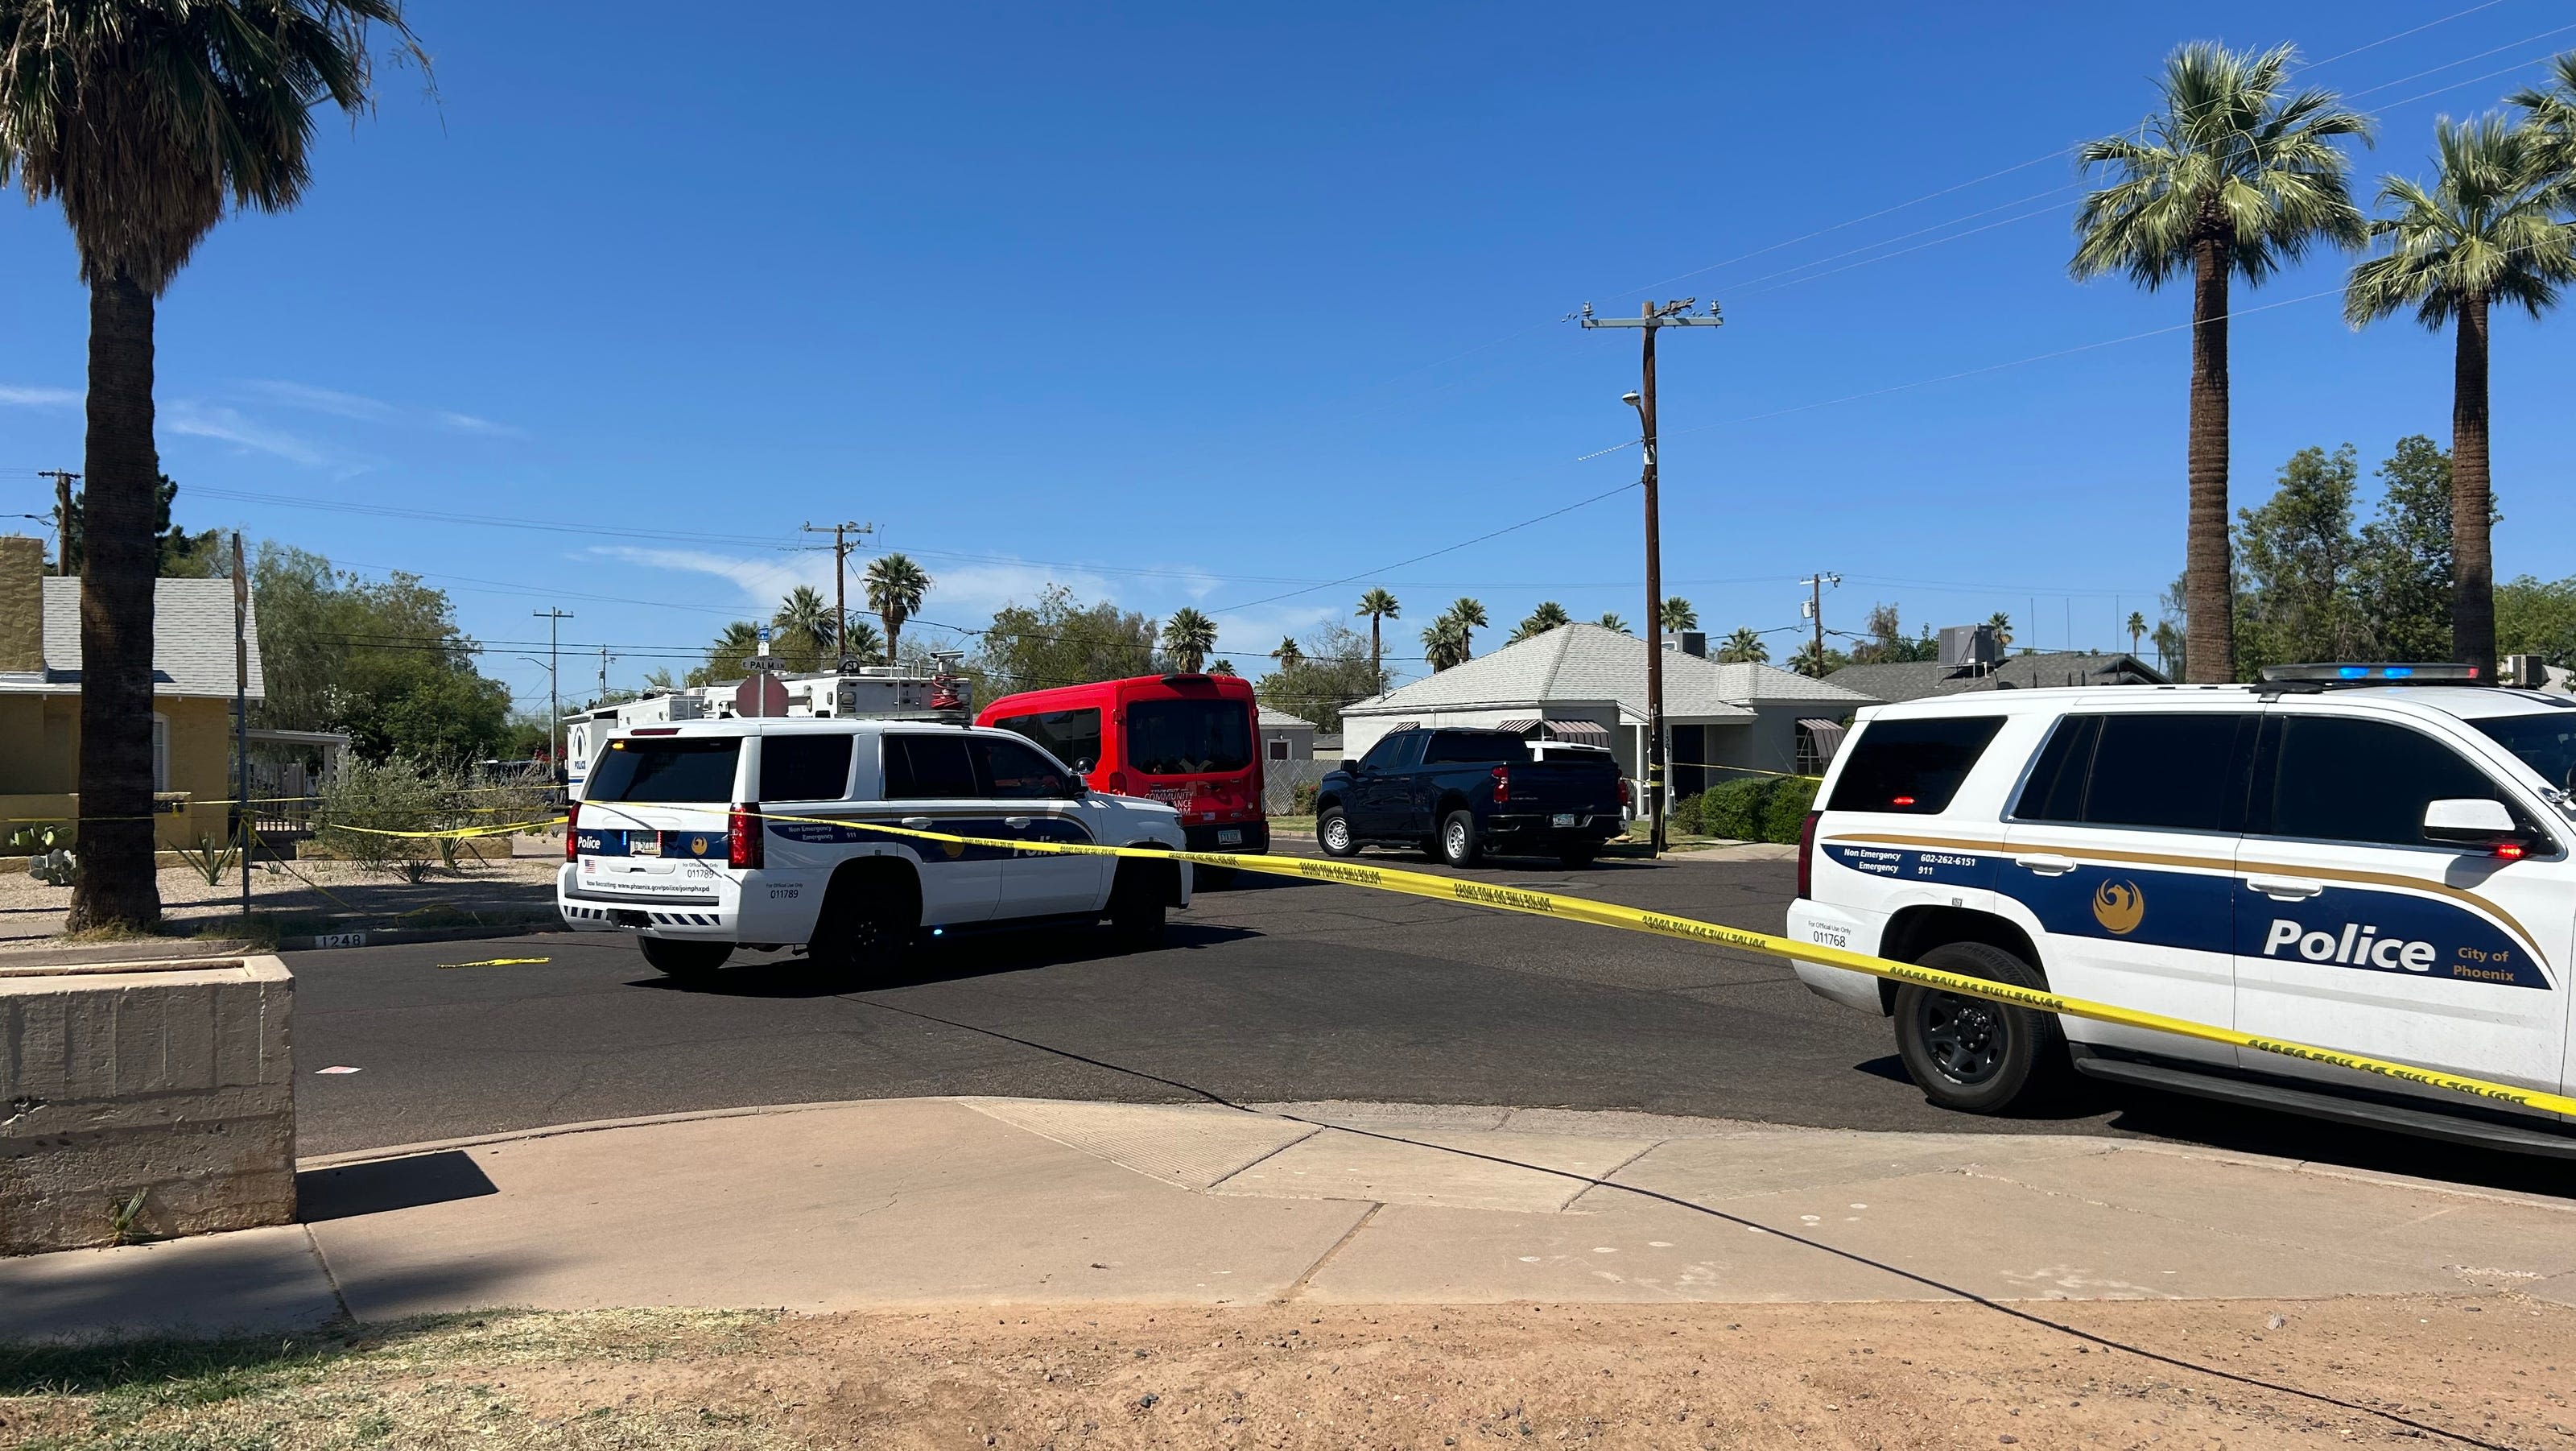 Suspect killed, no officers injured after police shooting near Coronado Park in Phoenix